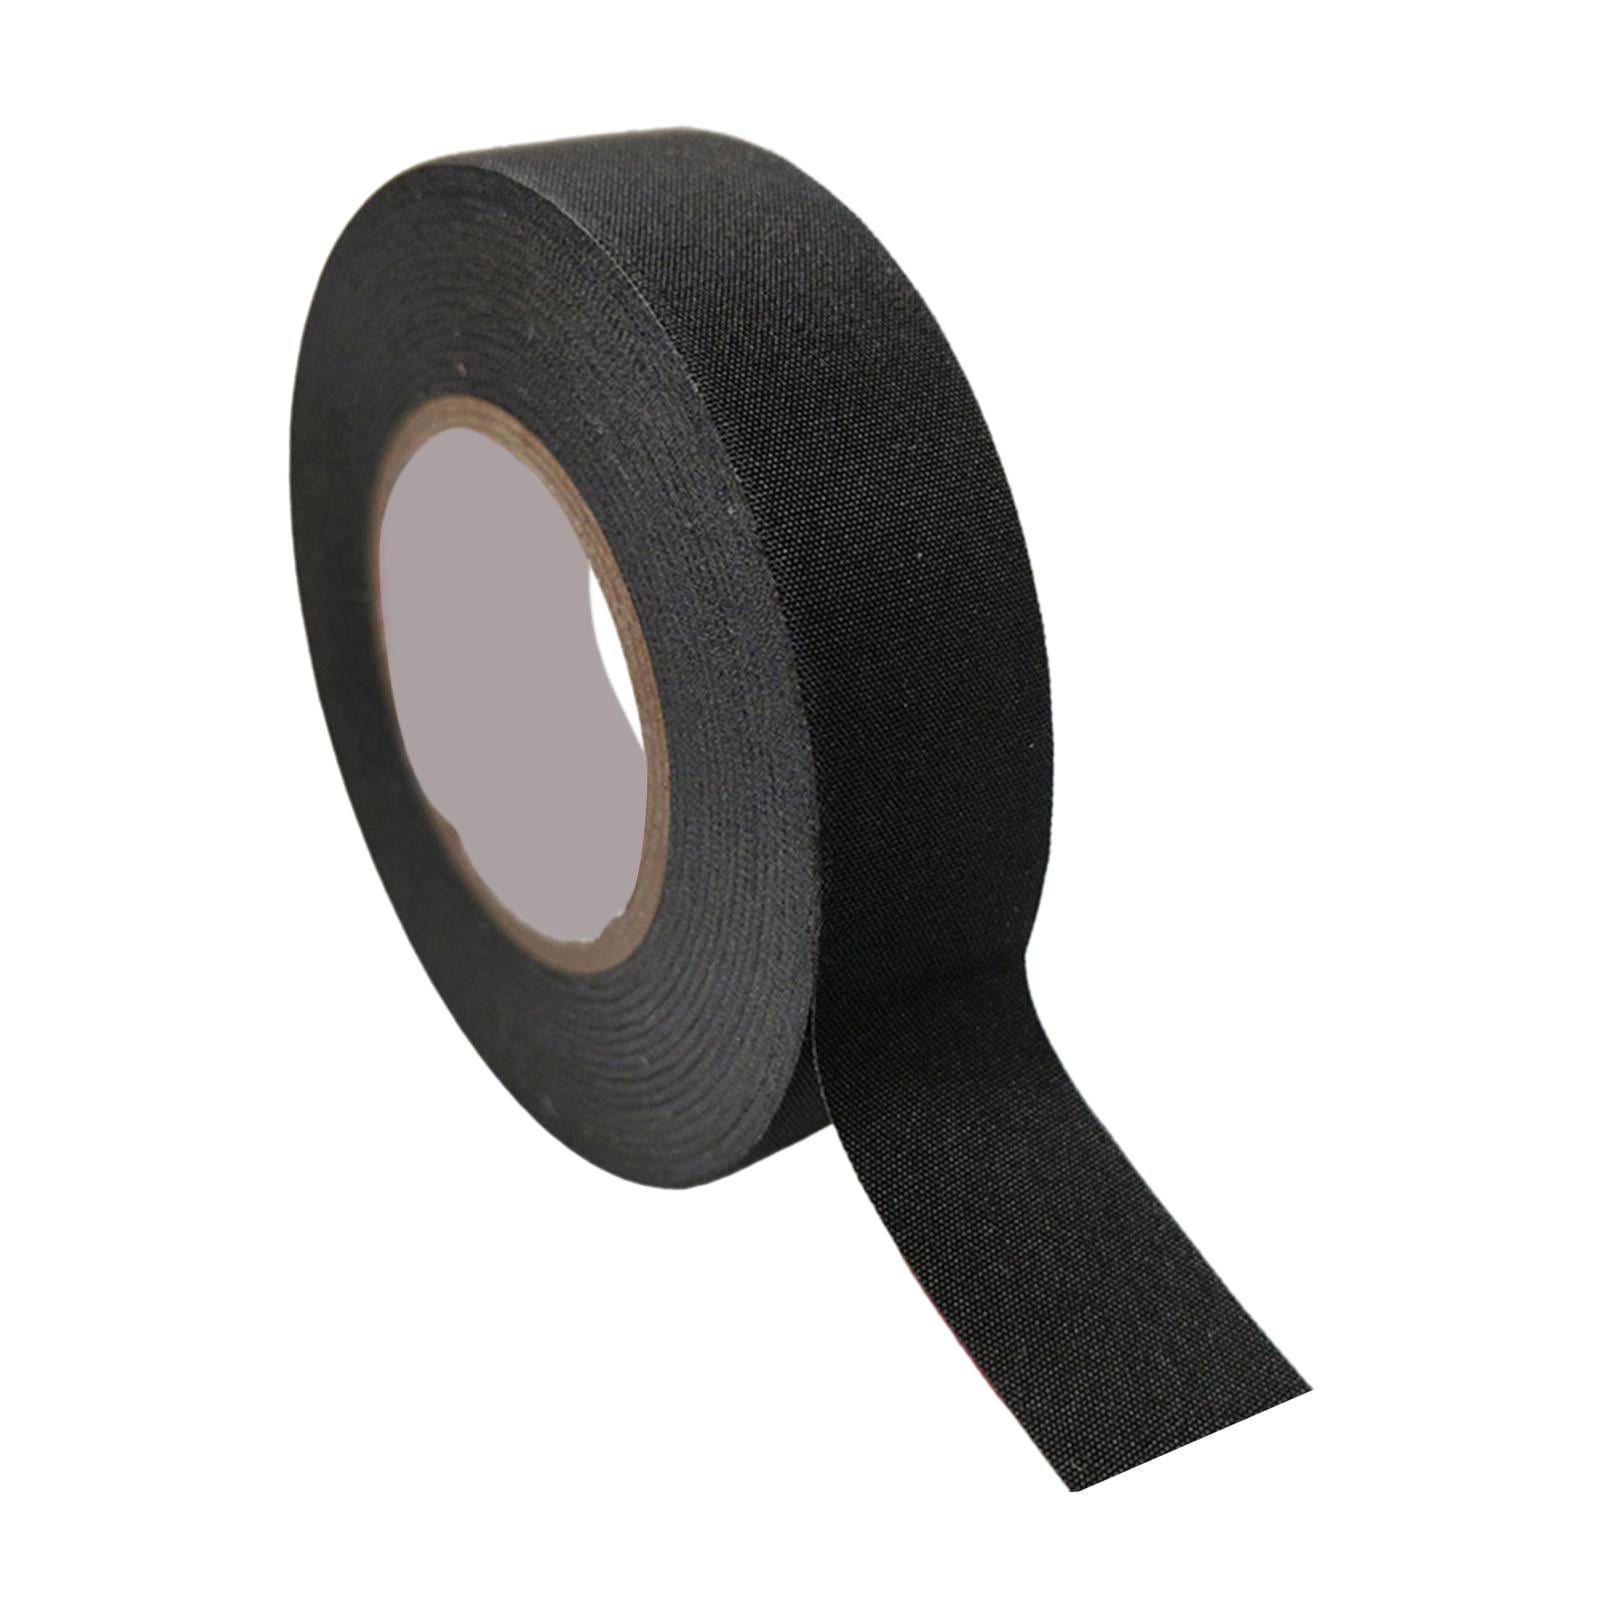 Pianpianzi Crack Tape B Tape Adhesive Tape for Wall Hanging Outdoor 14.7ft Tape Purpose PVC Black Insulated 1 Electrical 6.5inch Office Stationery